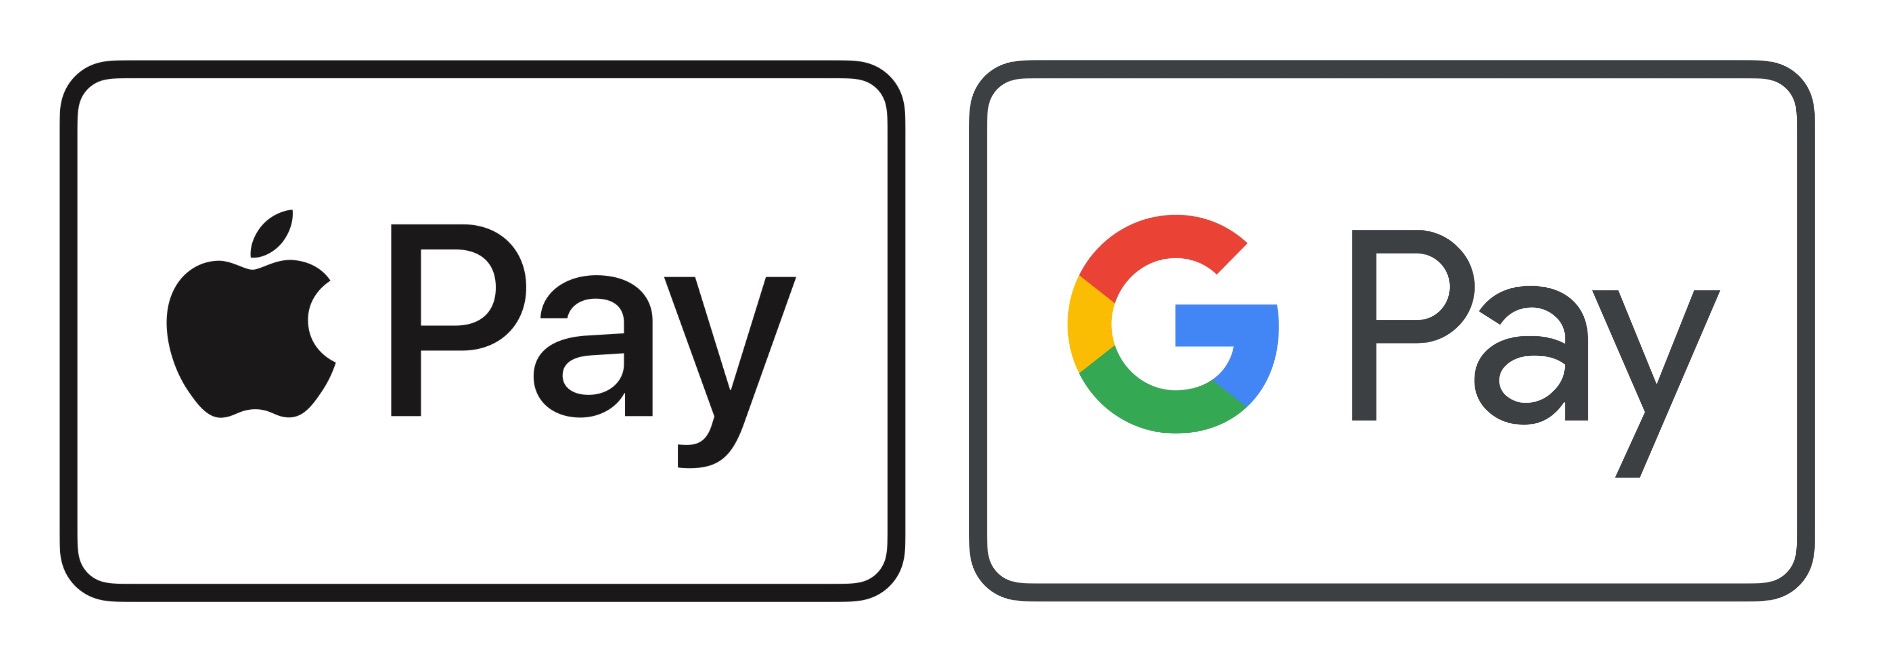 Apple Pay and Google Pay Logos